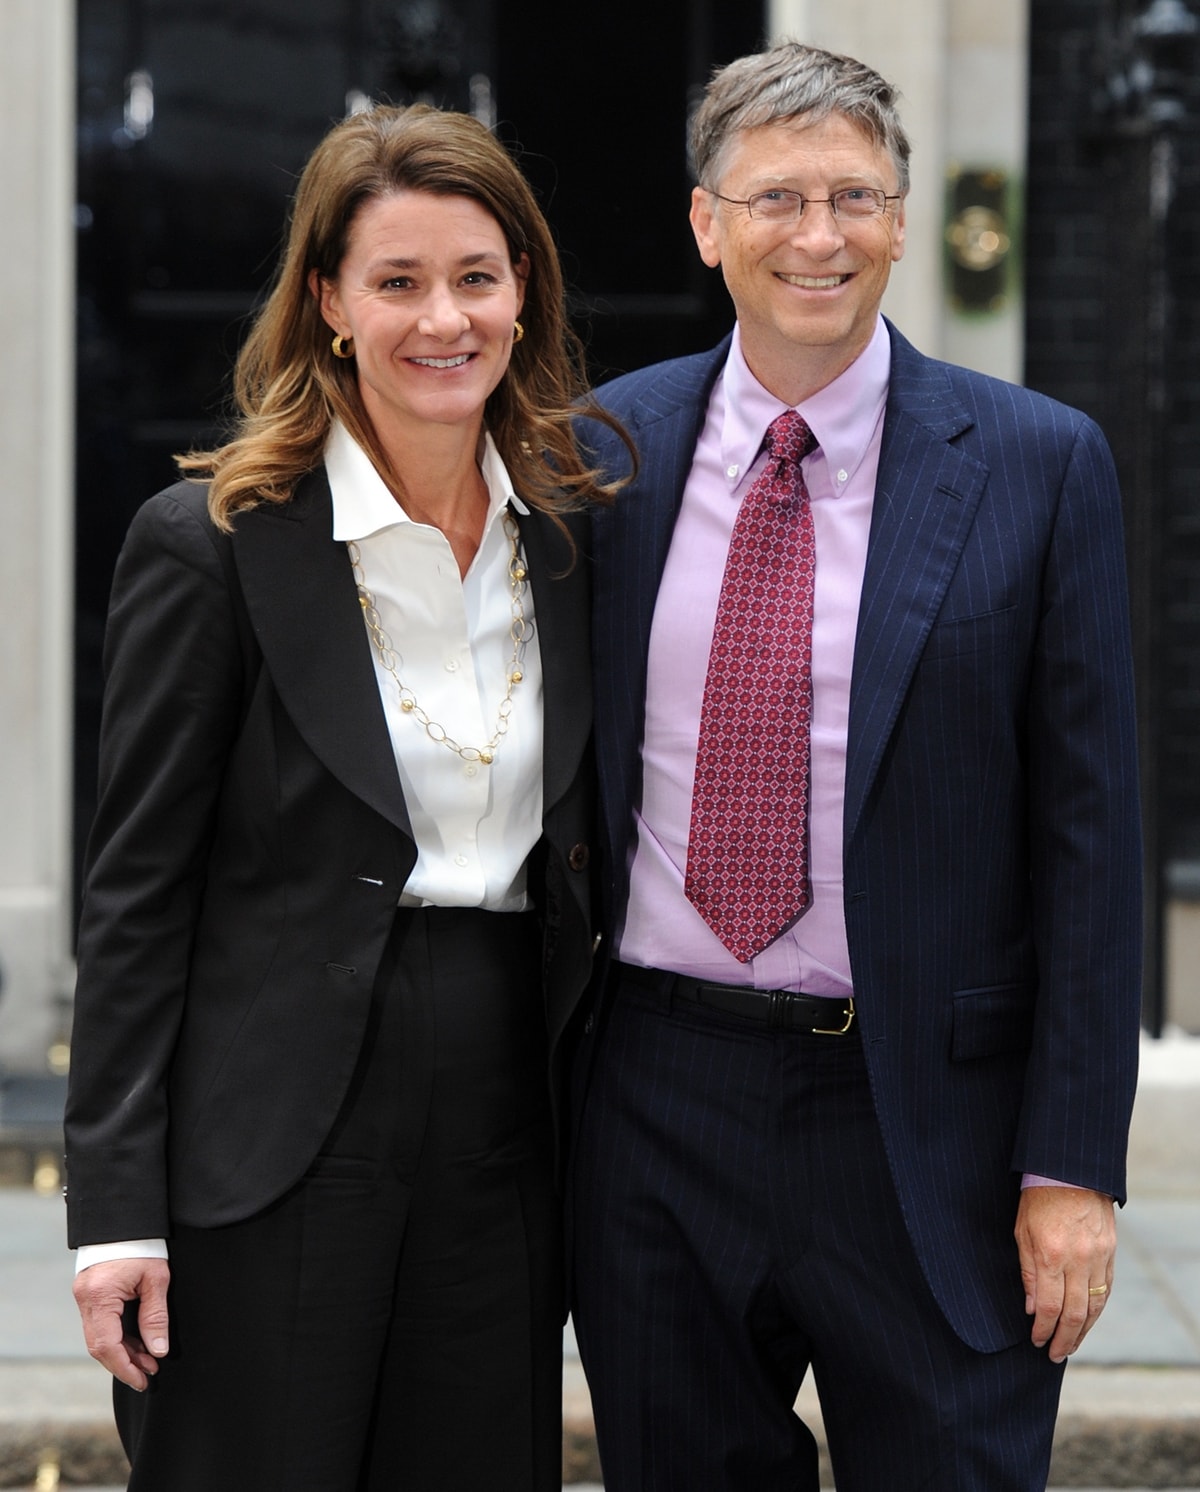 Bill Gates and Melinda French Gates founded The Bill & Melinda Gates Foundation (BMGF) in 2000